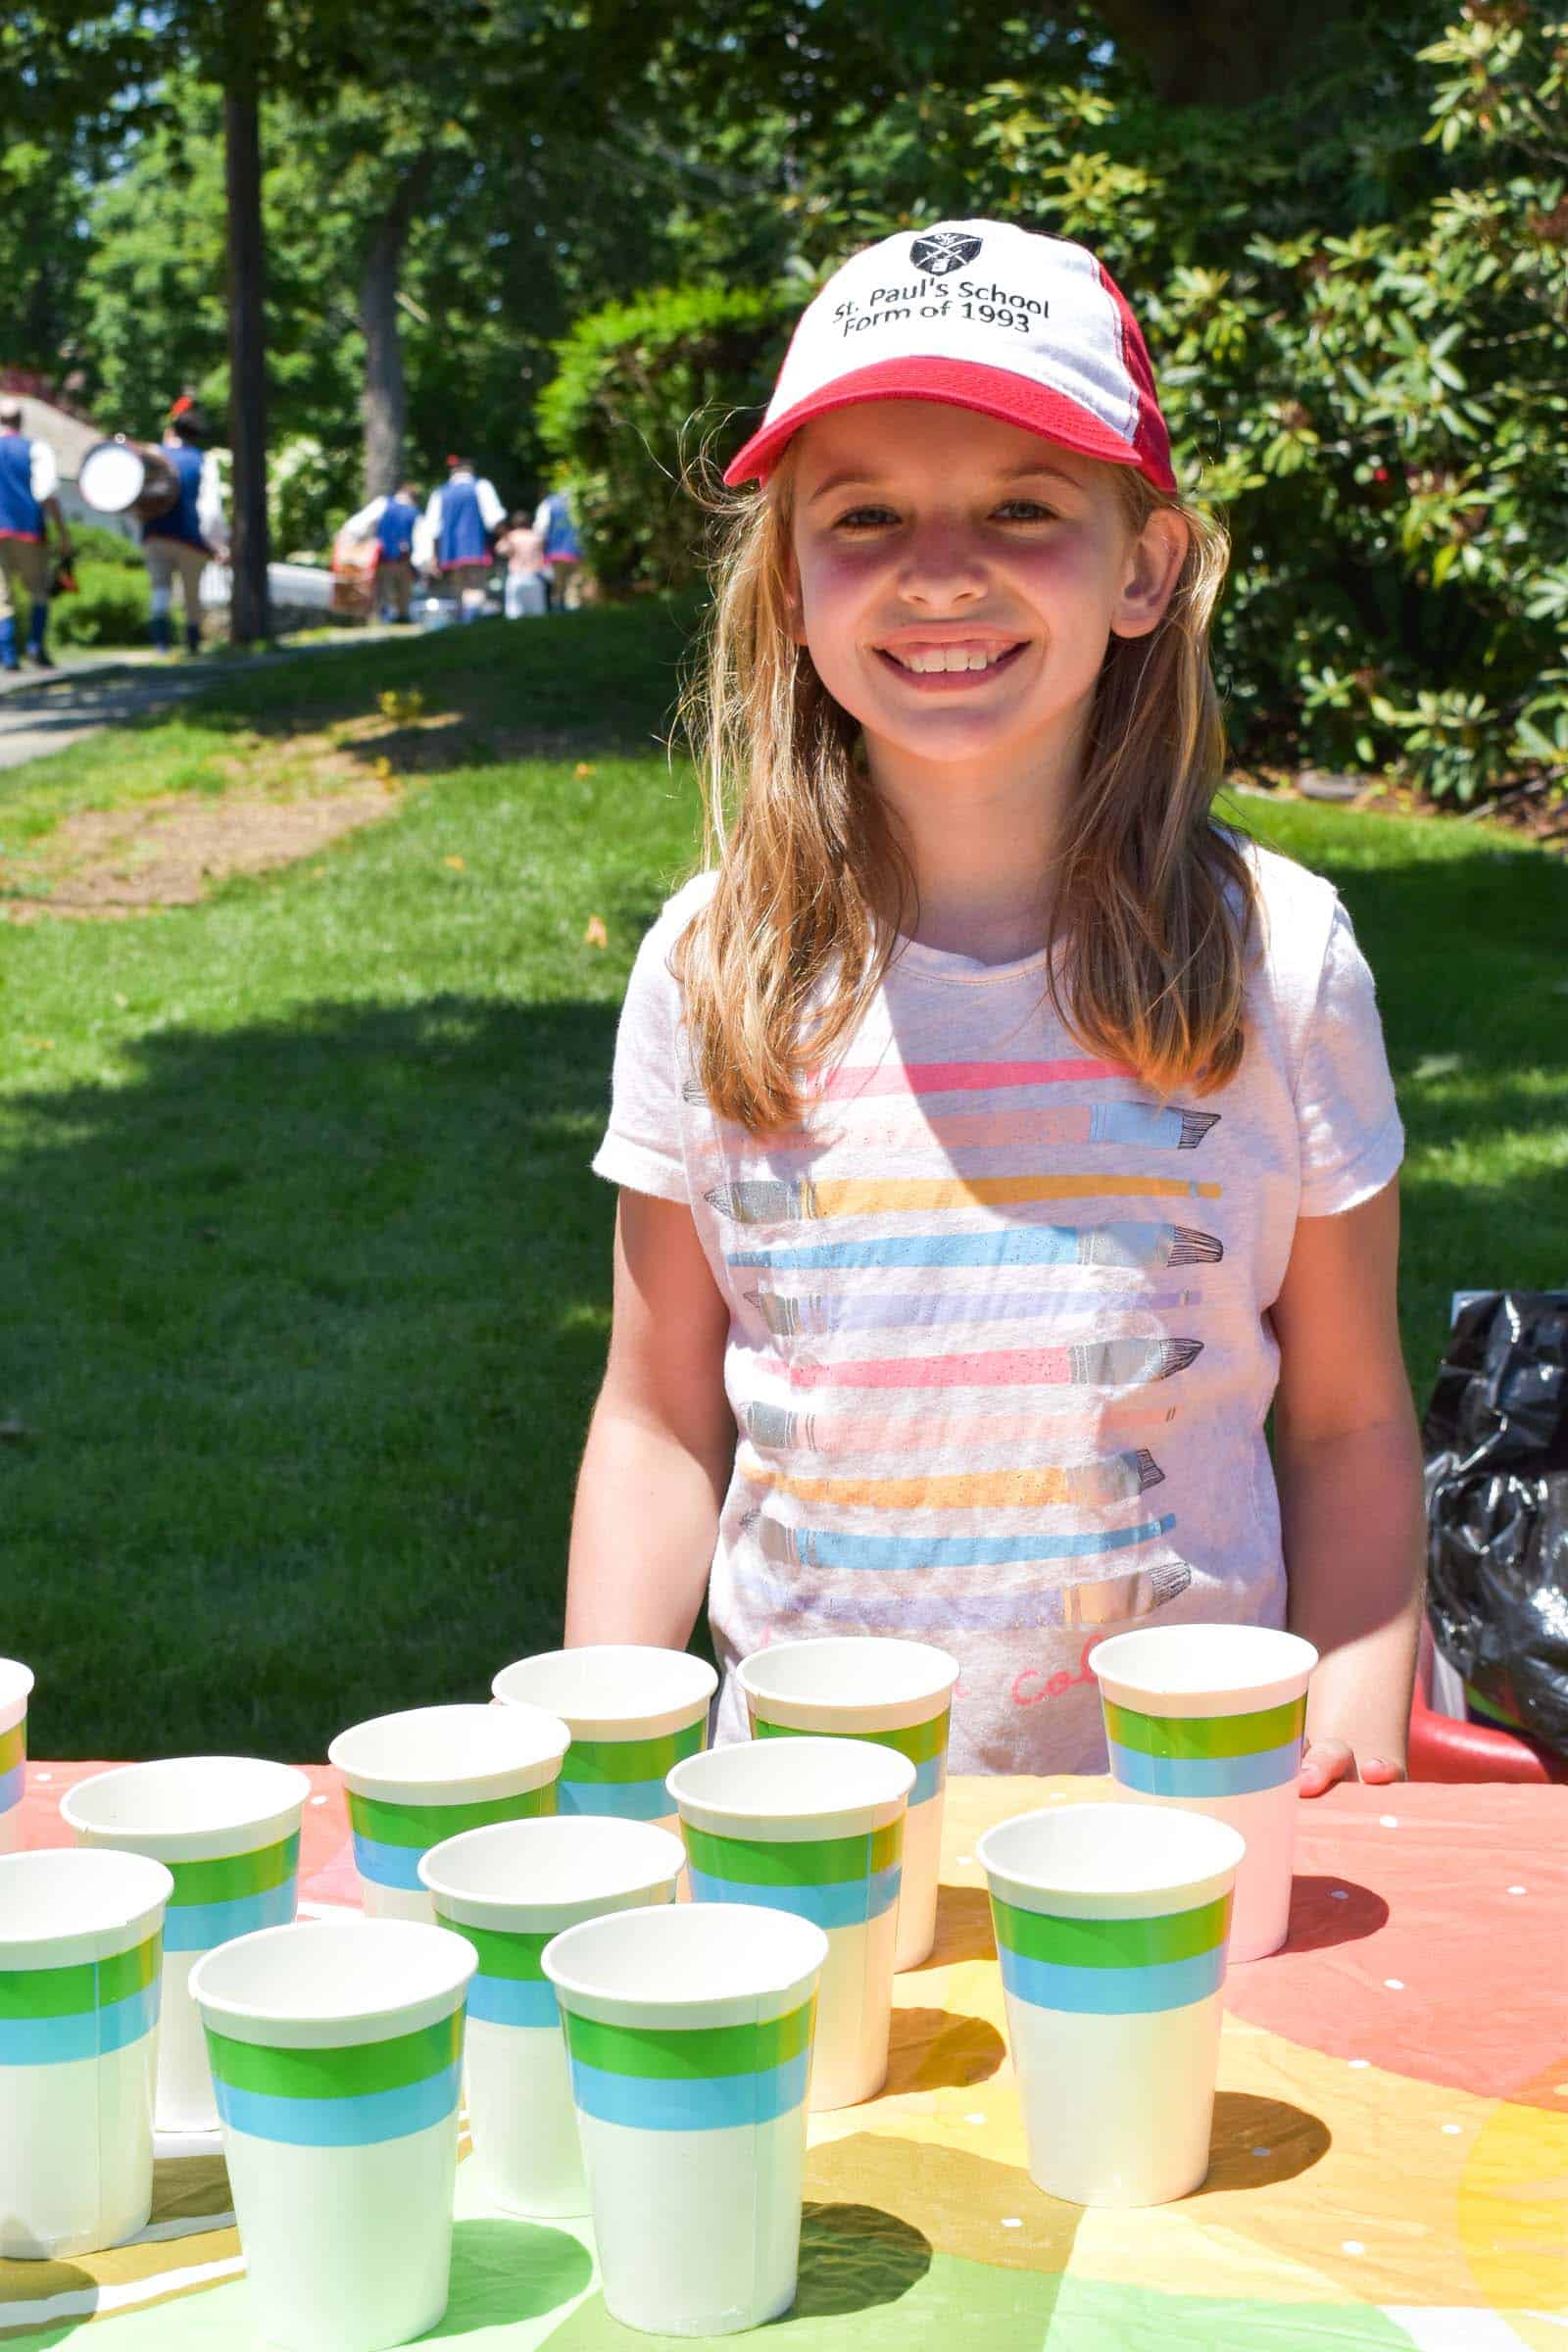 Setting up cups for lemonade sale